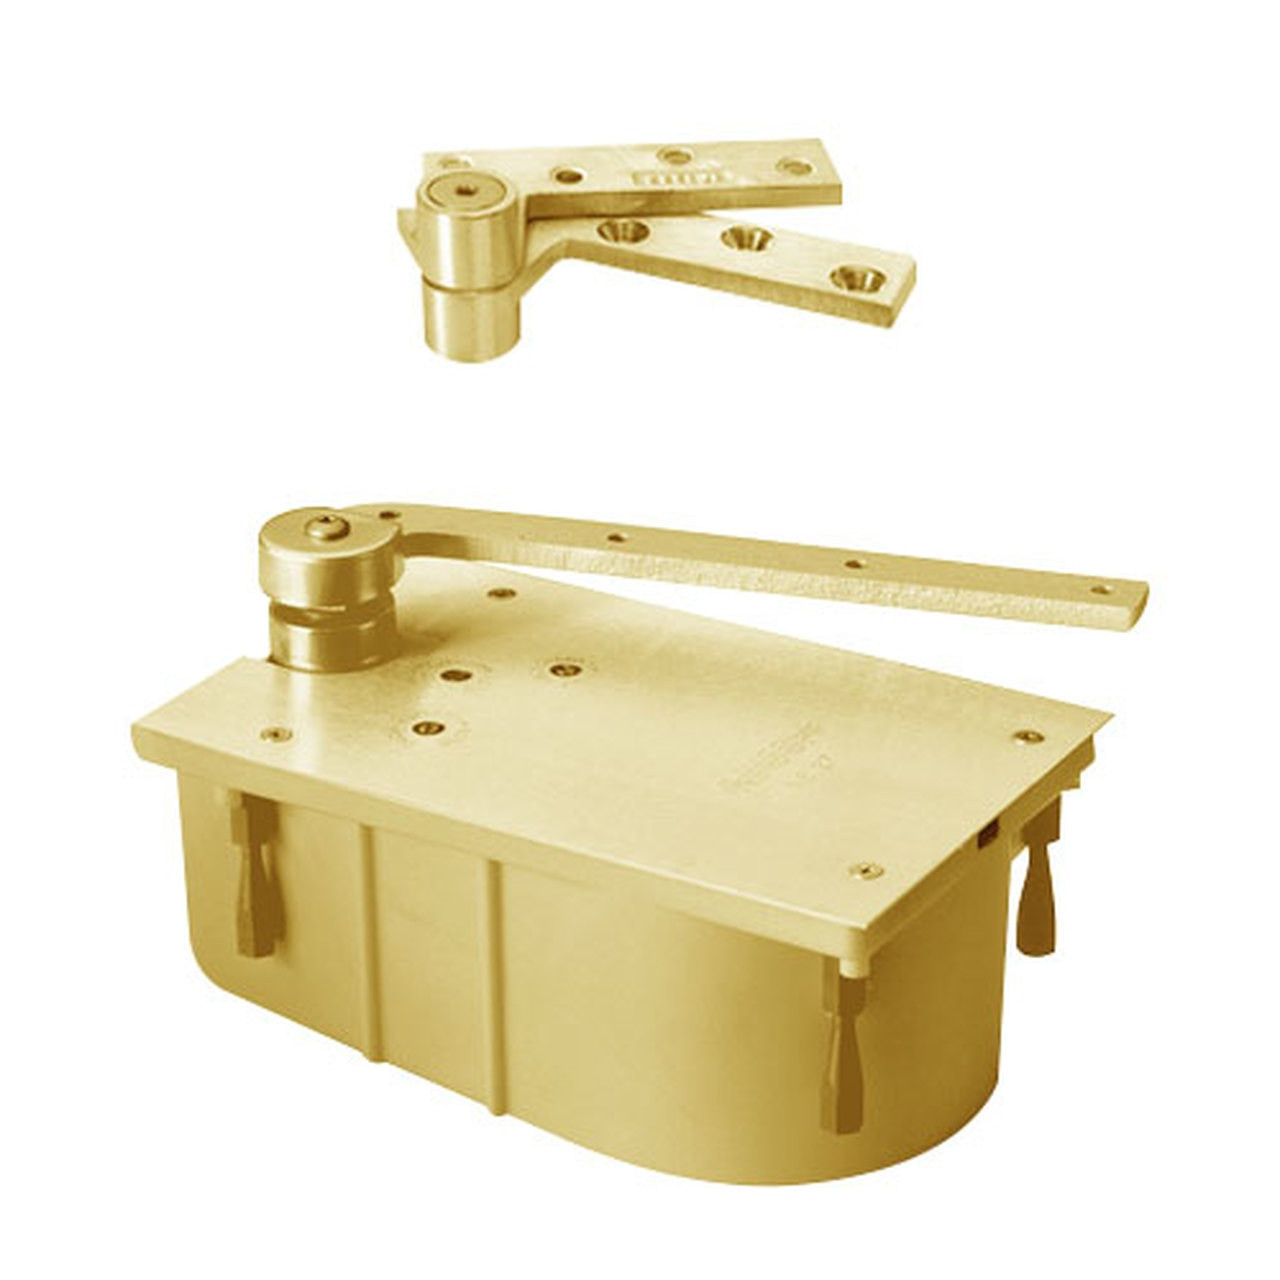 F127-85N-CWF-RH-606 Rixson 27 Series Fire Rated Heavy Duty 3/4" Offset Hung Floor Closer in Satin Brass Finish